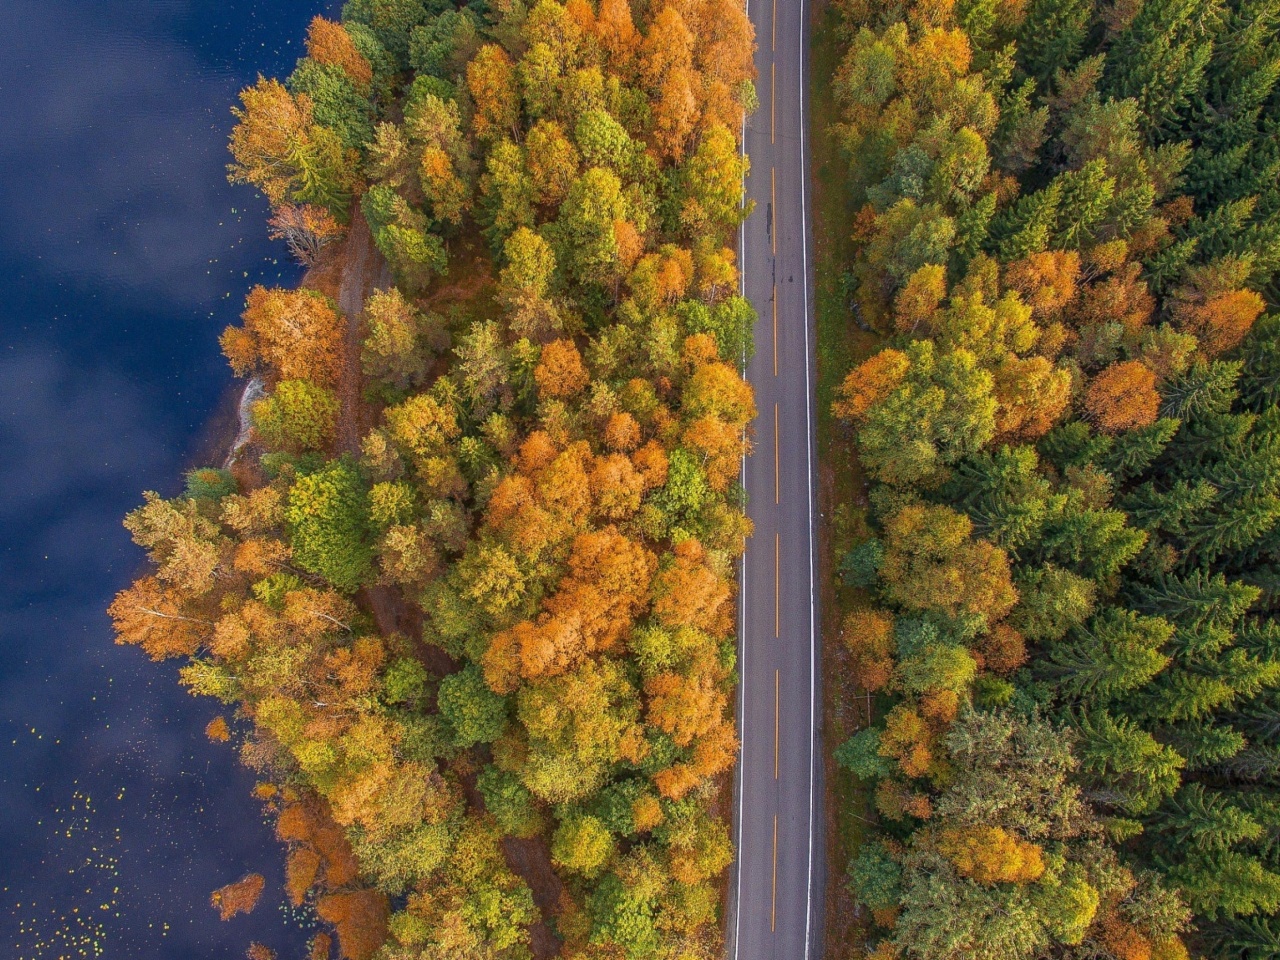 Drone photo of autumn forest screenshot #1 1280x960